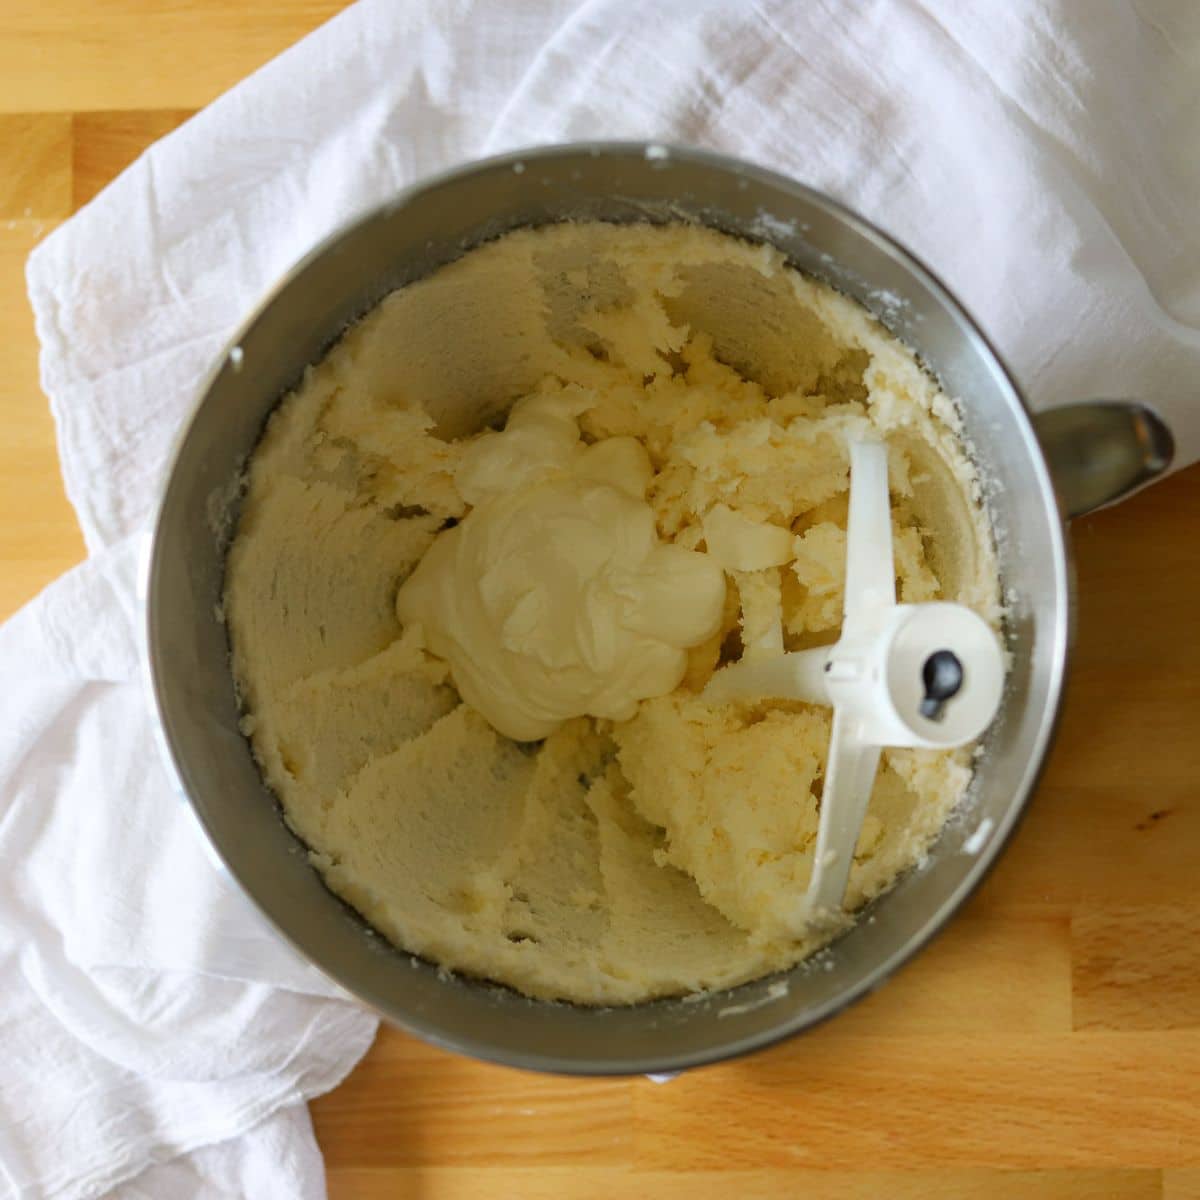 sour cream pound cake batter being prepared in a silver mixing bowl with a kitchen aid paddle